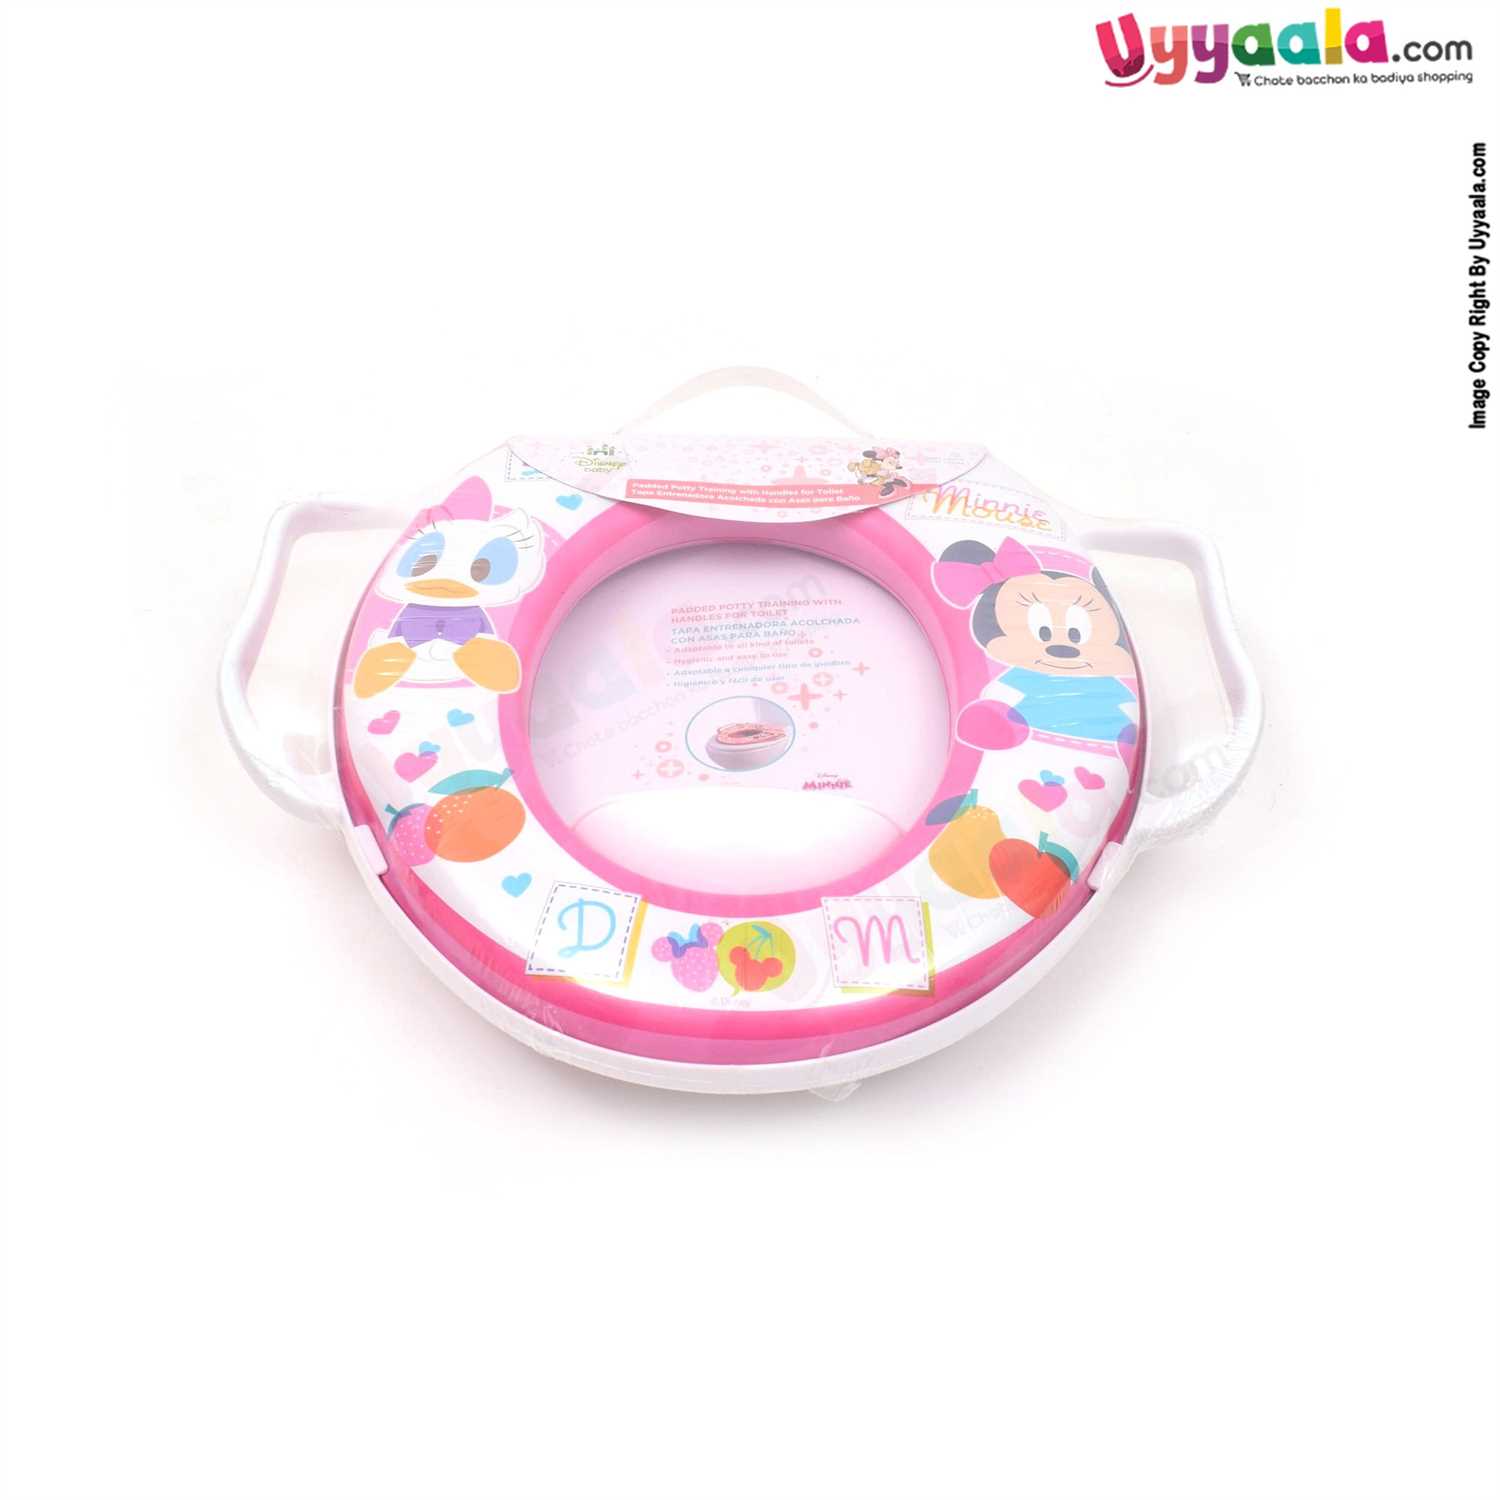 DISNEY BABY Cushioned Potty Seat with Handle, Minnie Mouse Print - Pink, White